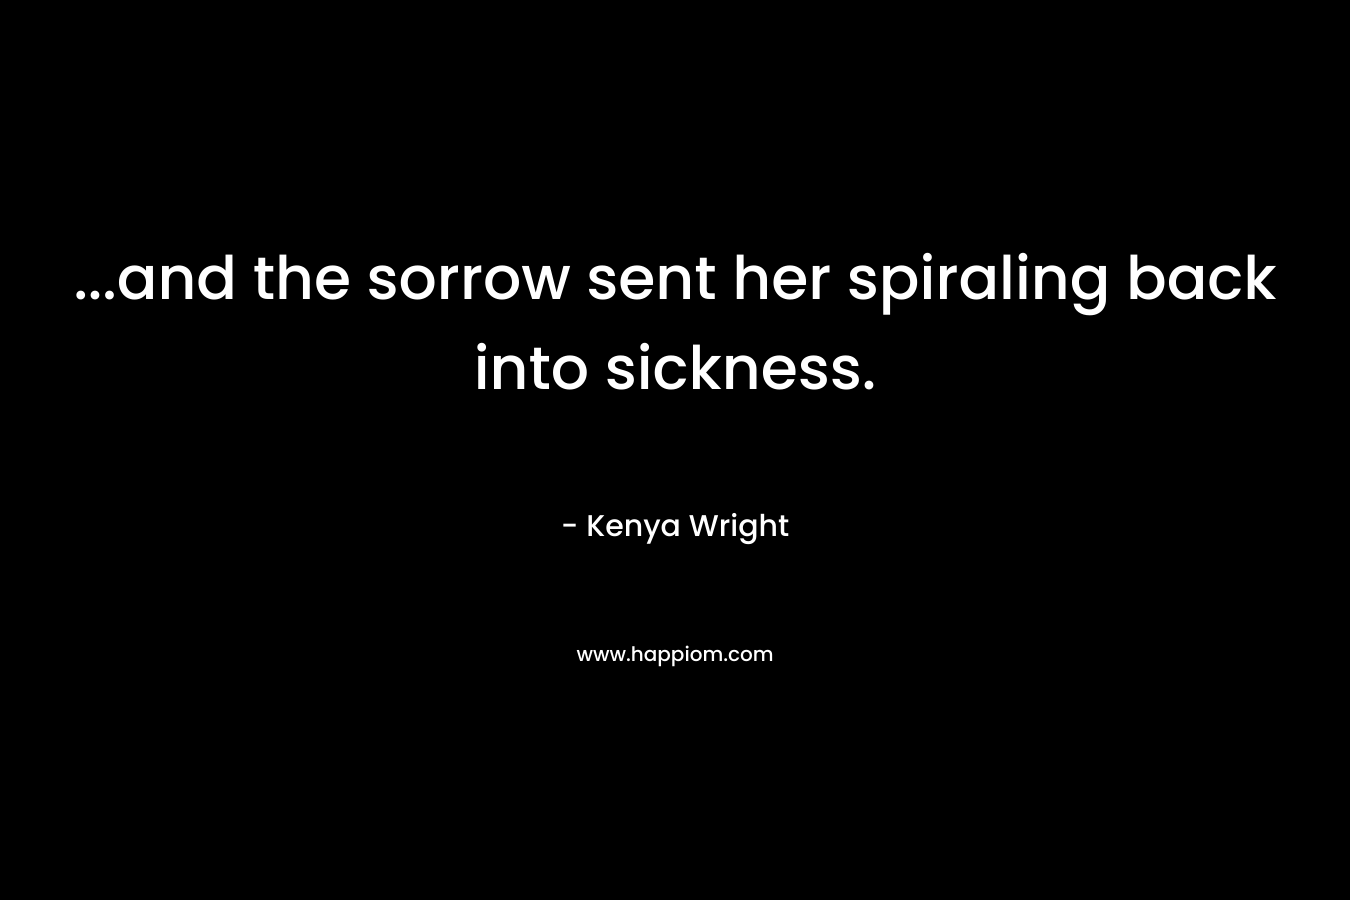 ...and the sorrow sent her spiraling back into sickness.